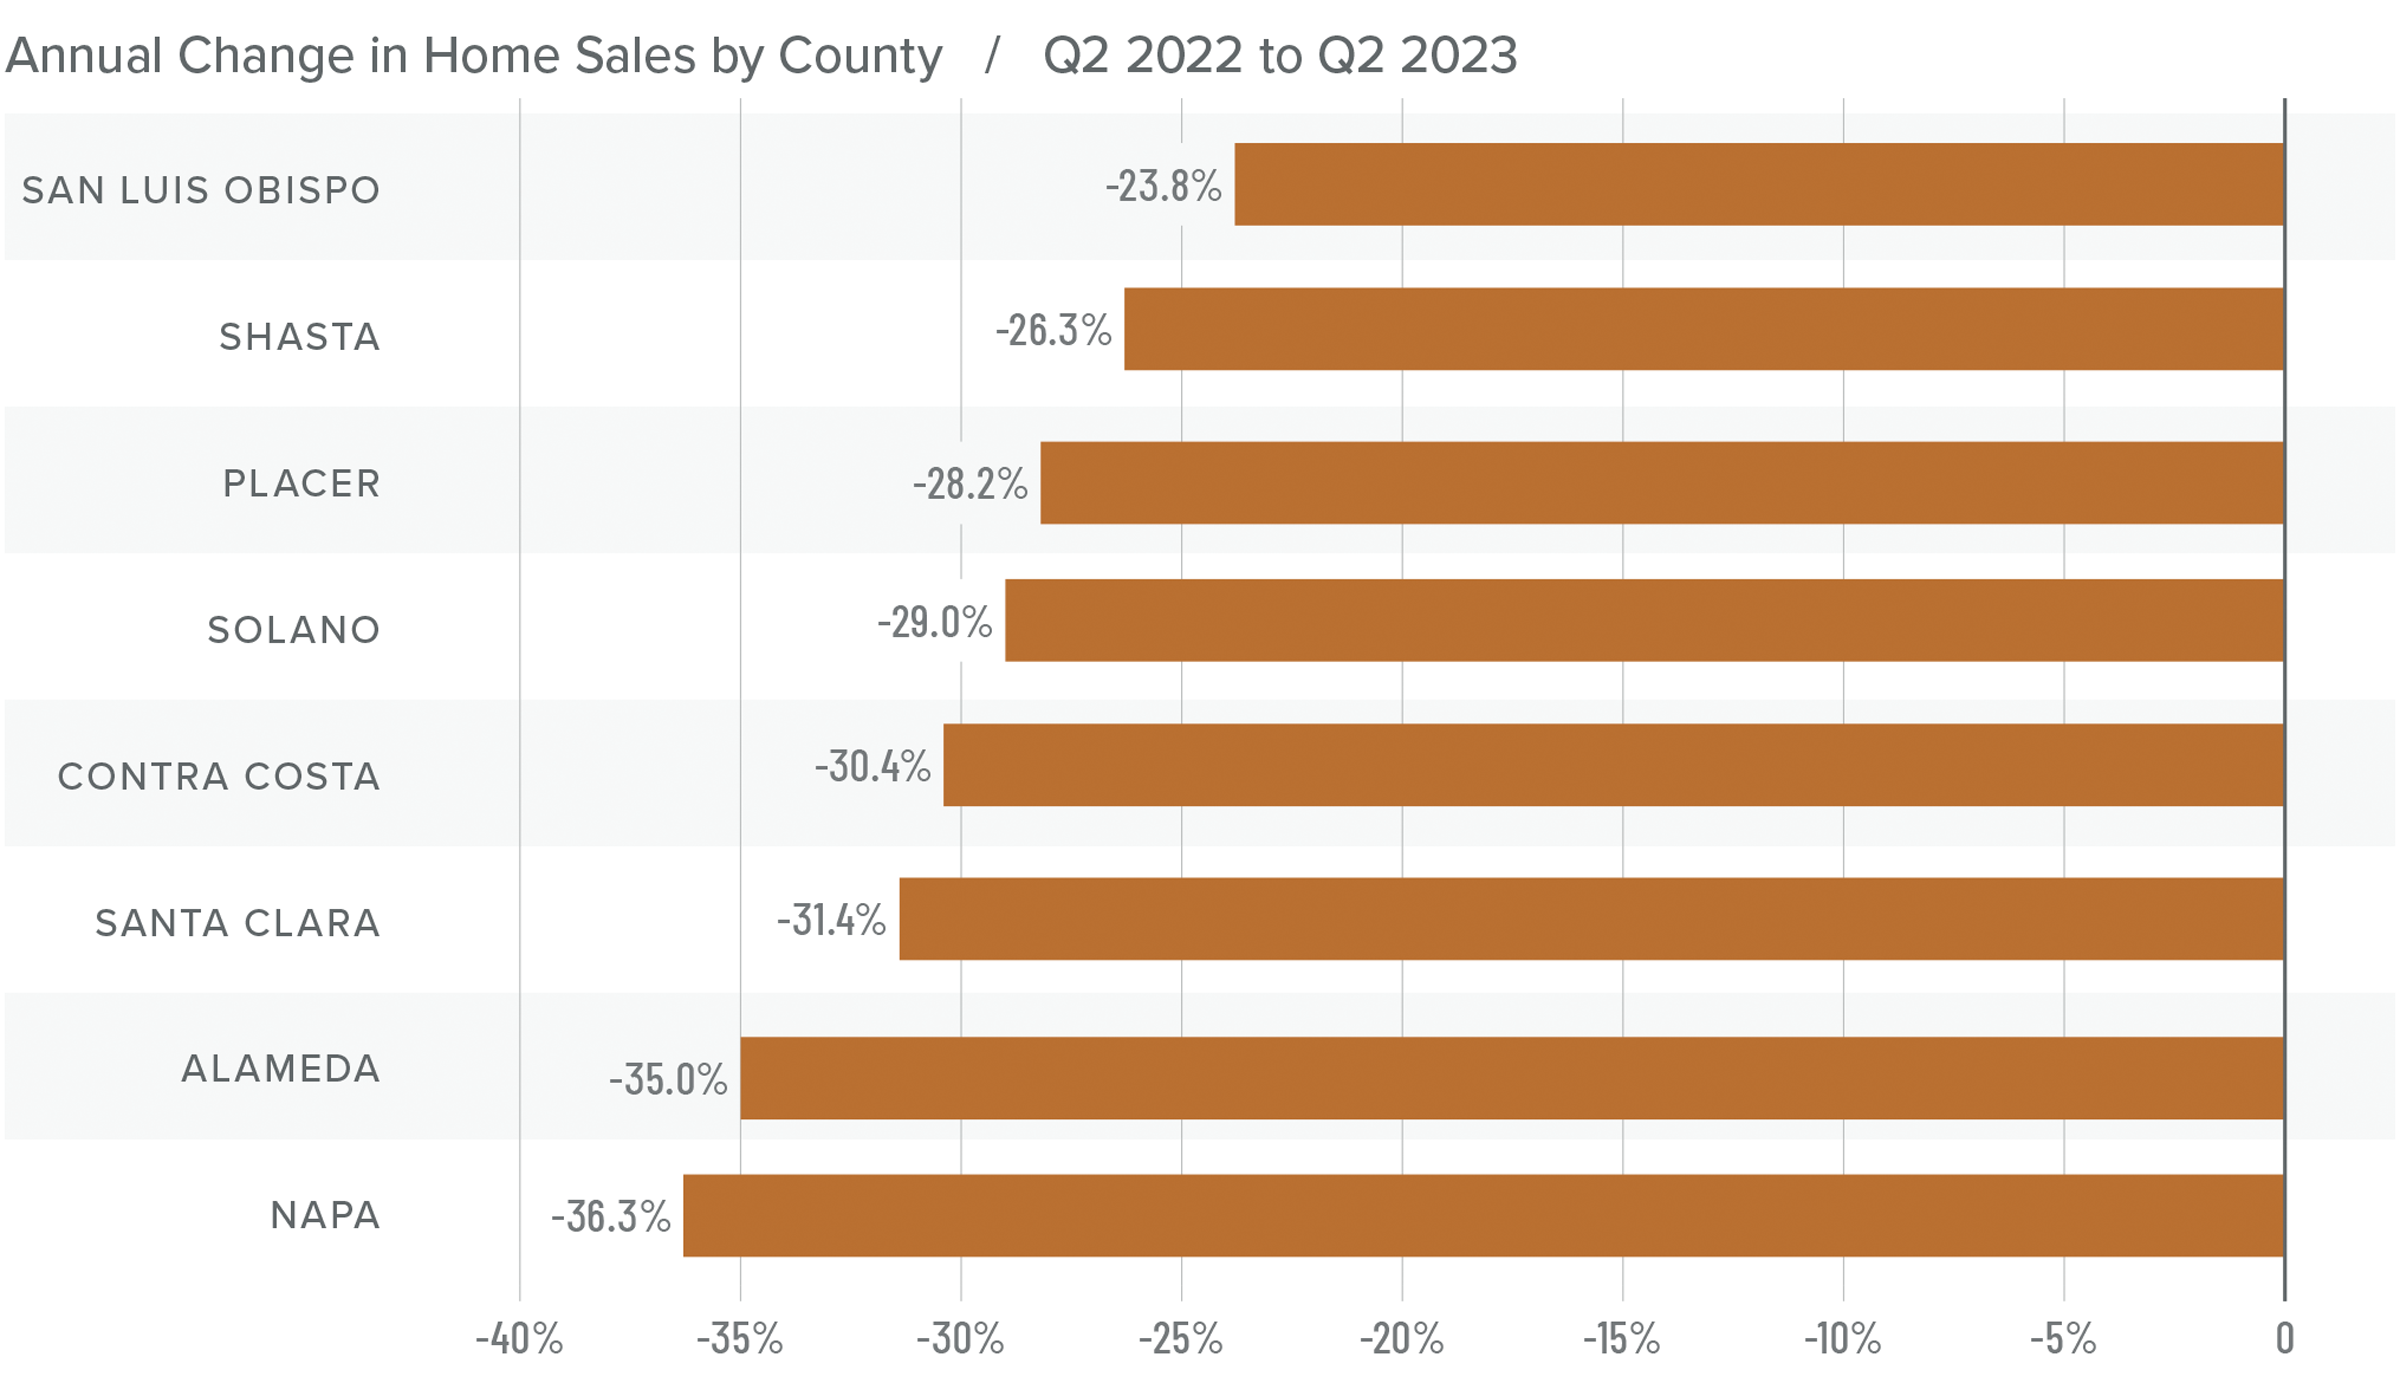 A graph showing the annual change in home sales by county in Northern California from Q2 2022 to Q2 2023. San Luis Obispo had the least drastic change at -23.8%, while Napa had the largest change at -36.3%. Areas like Solano and Contra Costa were in the middle at around -30%.